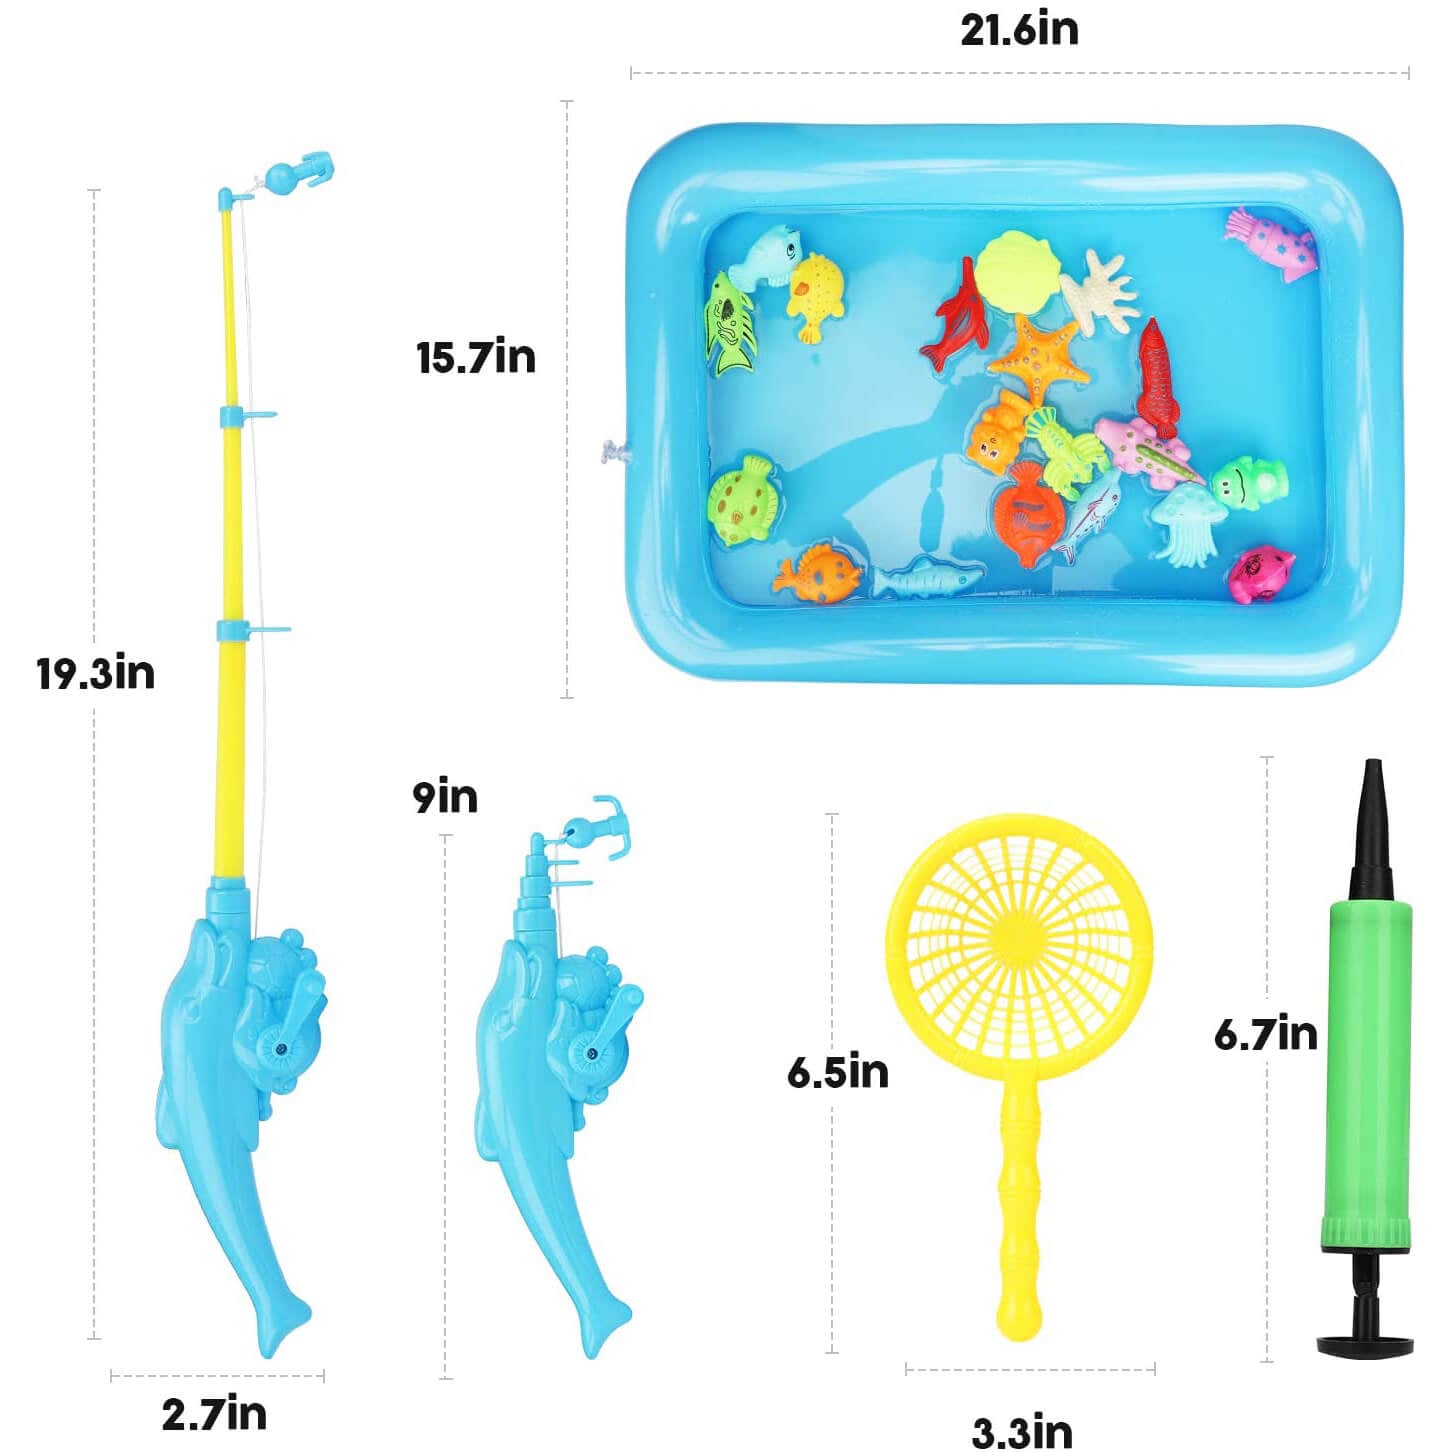 Fishing Game - Includes Pool, Magnetic fish and Fishing Pools